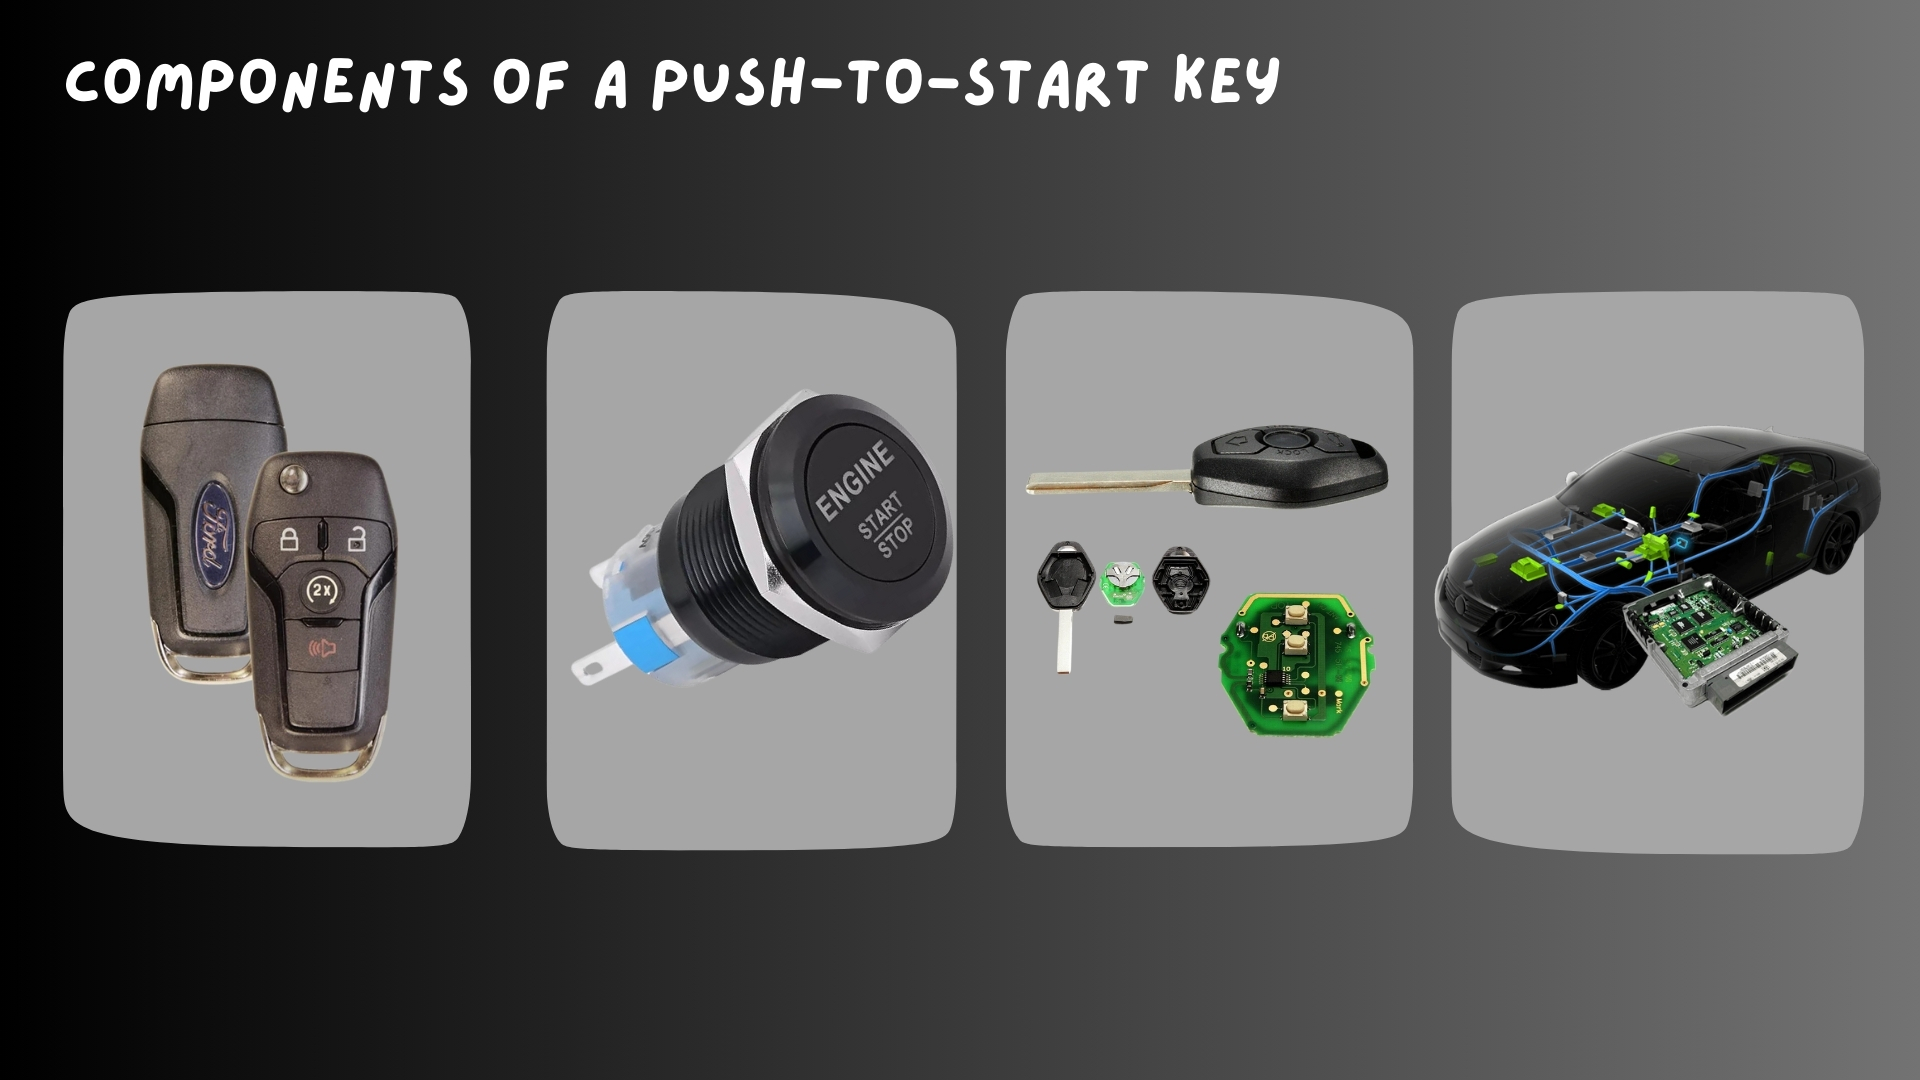 A comprehensive overview of the components of a push-to-start key replacement, including remote key fobs, a push-to-start button, internal circuitry, and a car's start system diagram.